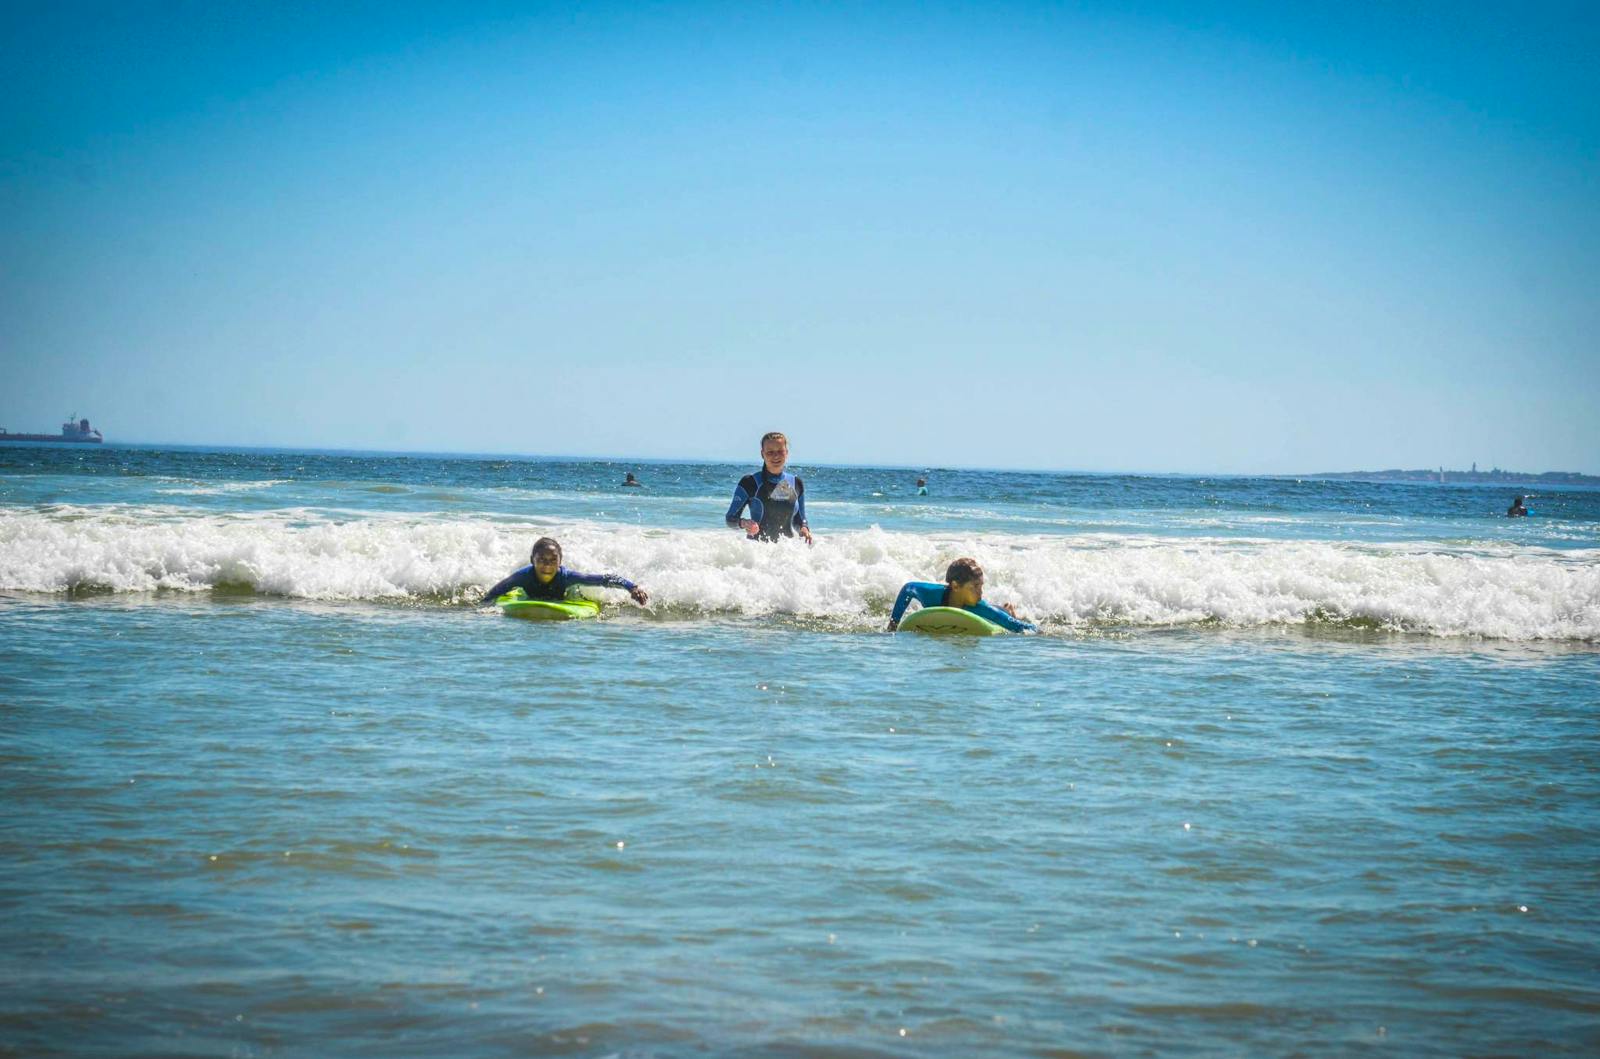 Swimming & Surfing Instructor | Volunteer in South Africa 2023